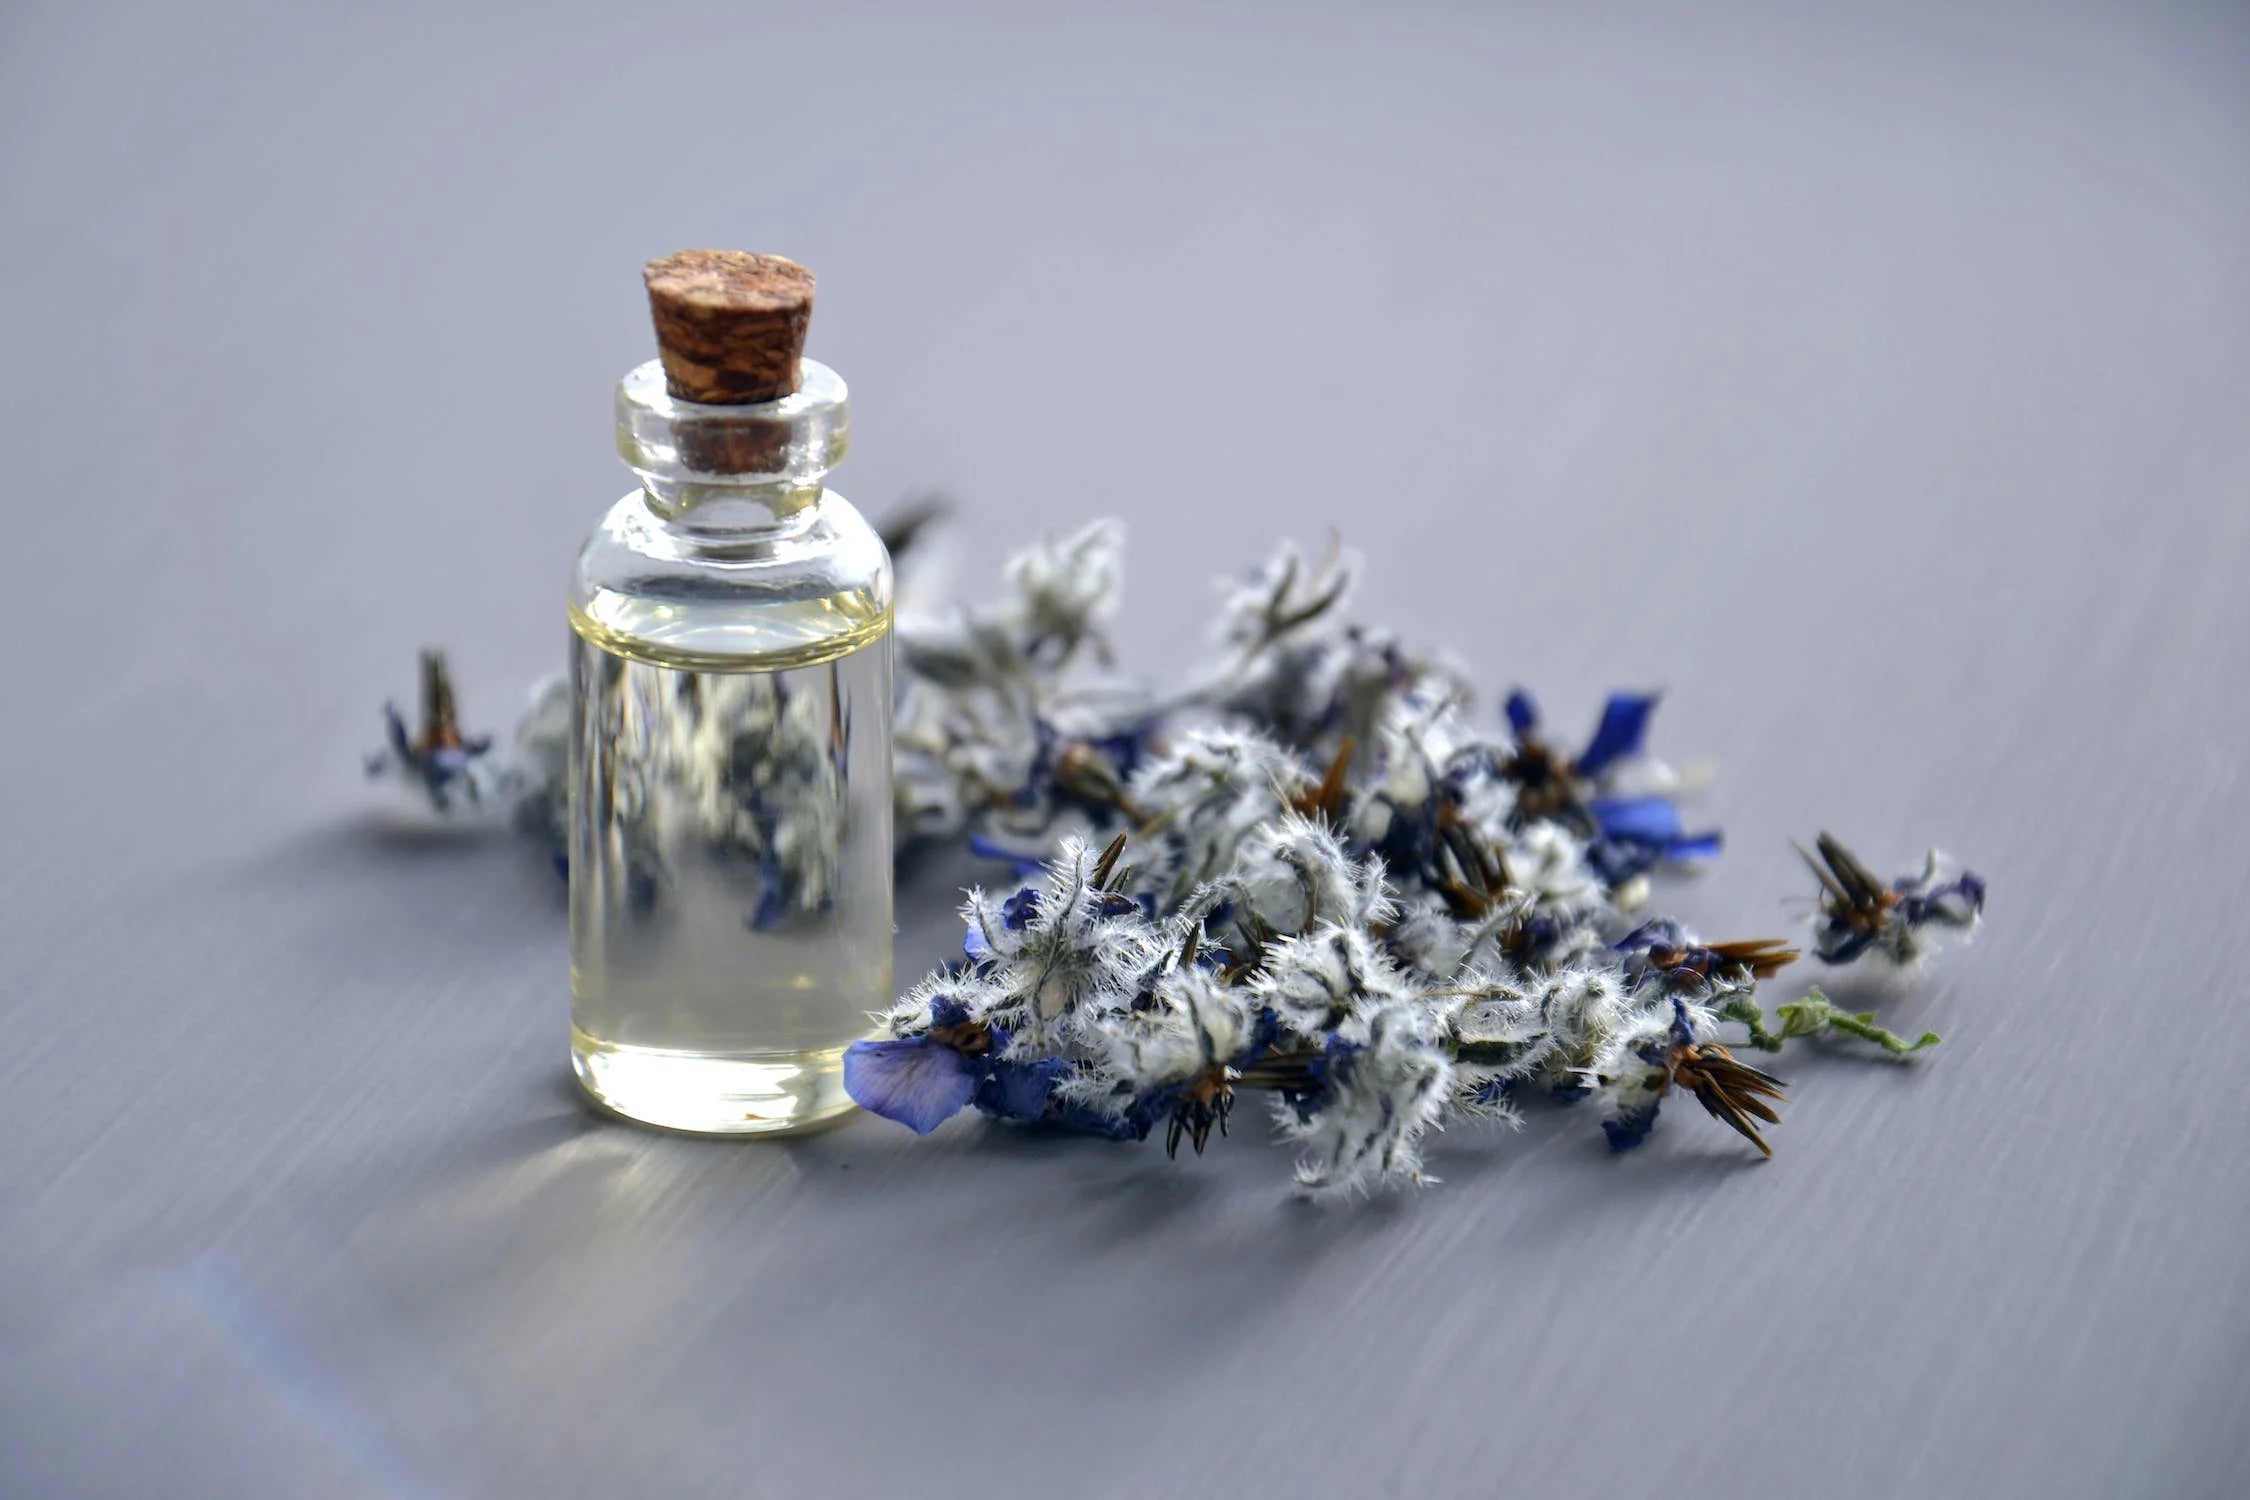 Relax and De-Stress During the Holidays with Aromatherapy